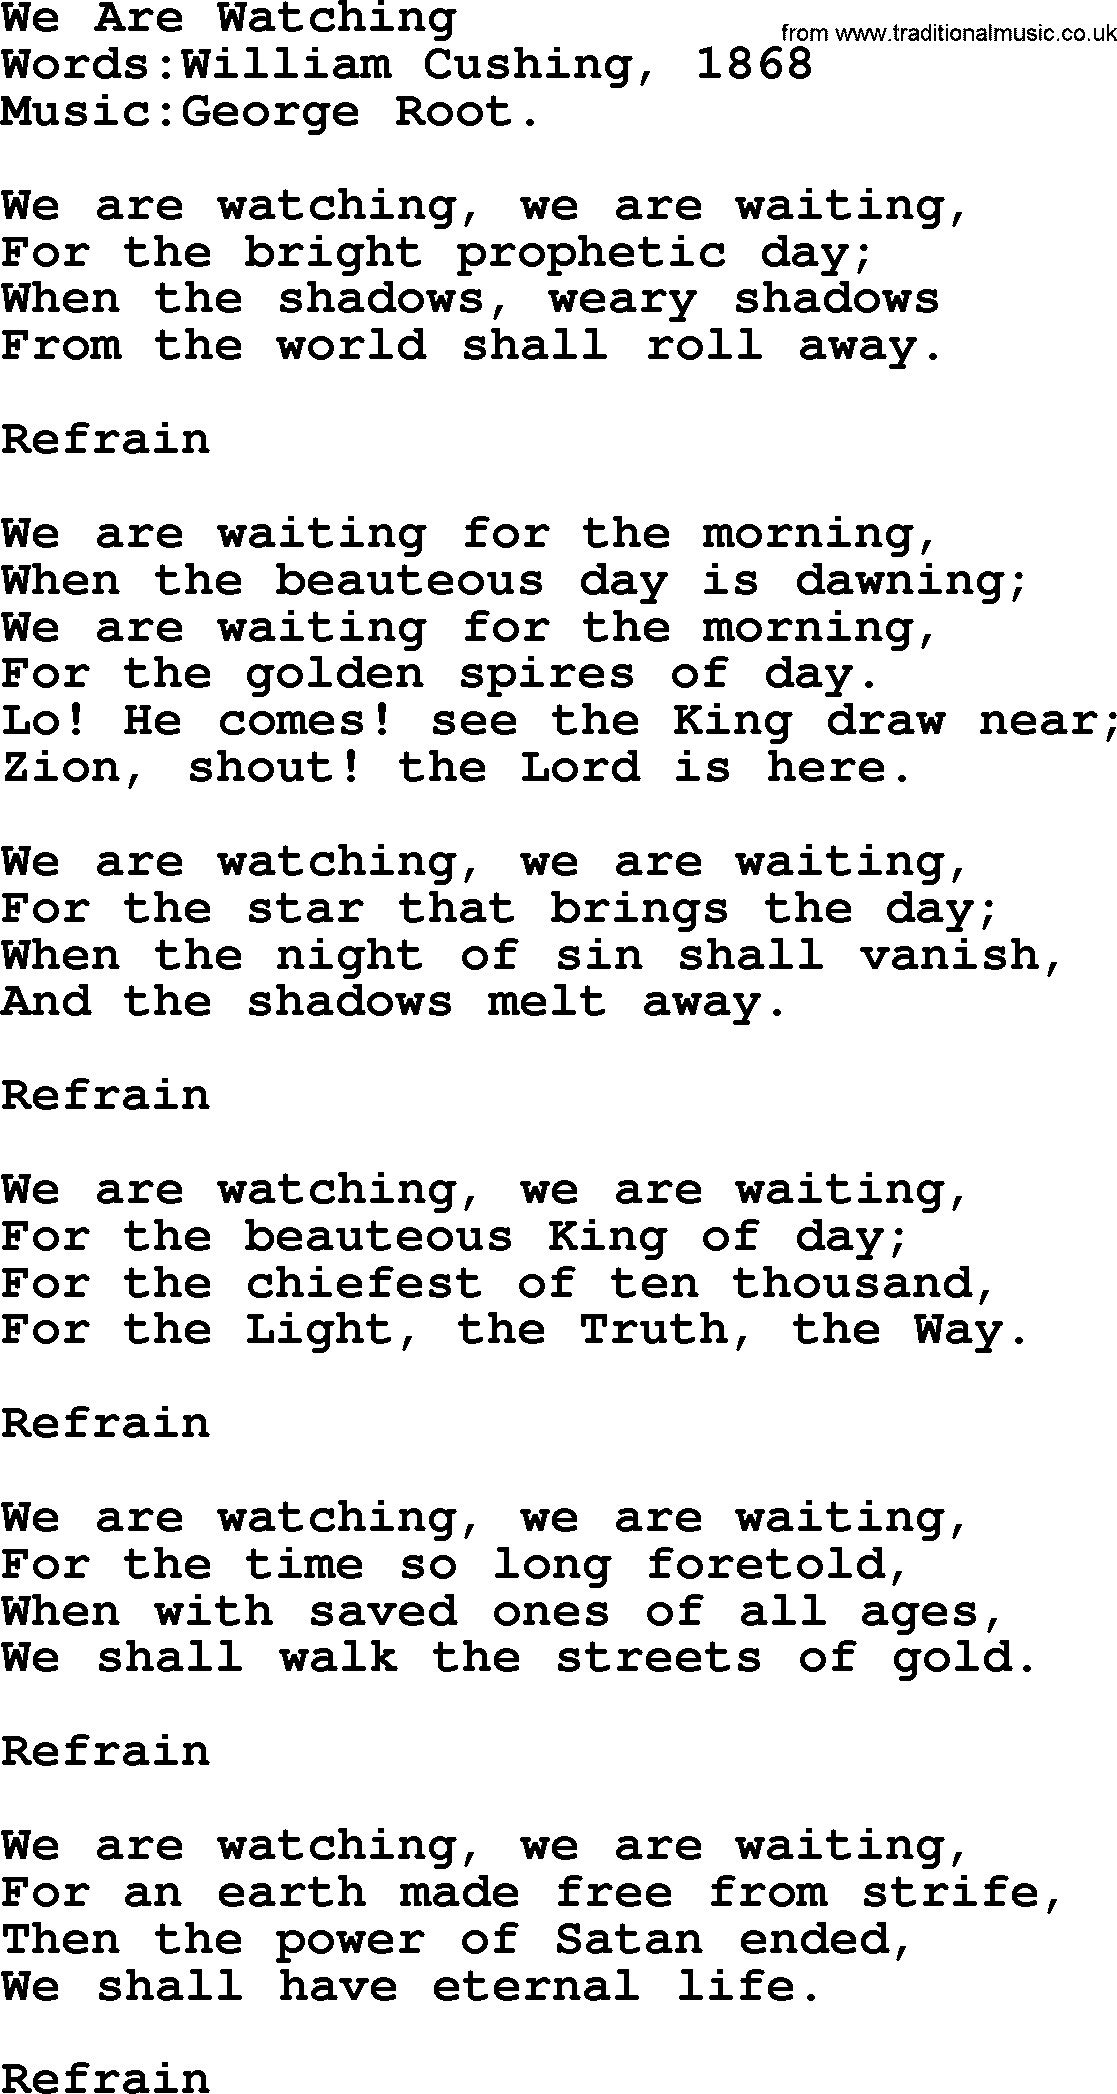 Christian hymns and songs about Jesus' Return(The Second Coming): We Are Watching, lyrics with PDF